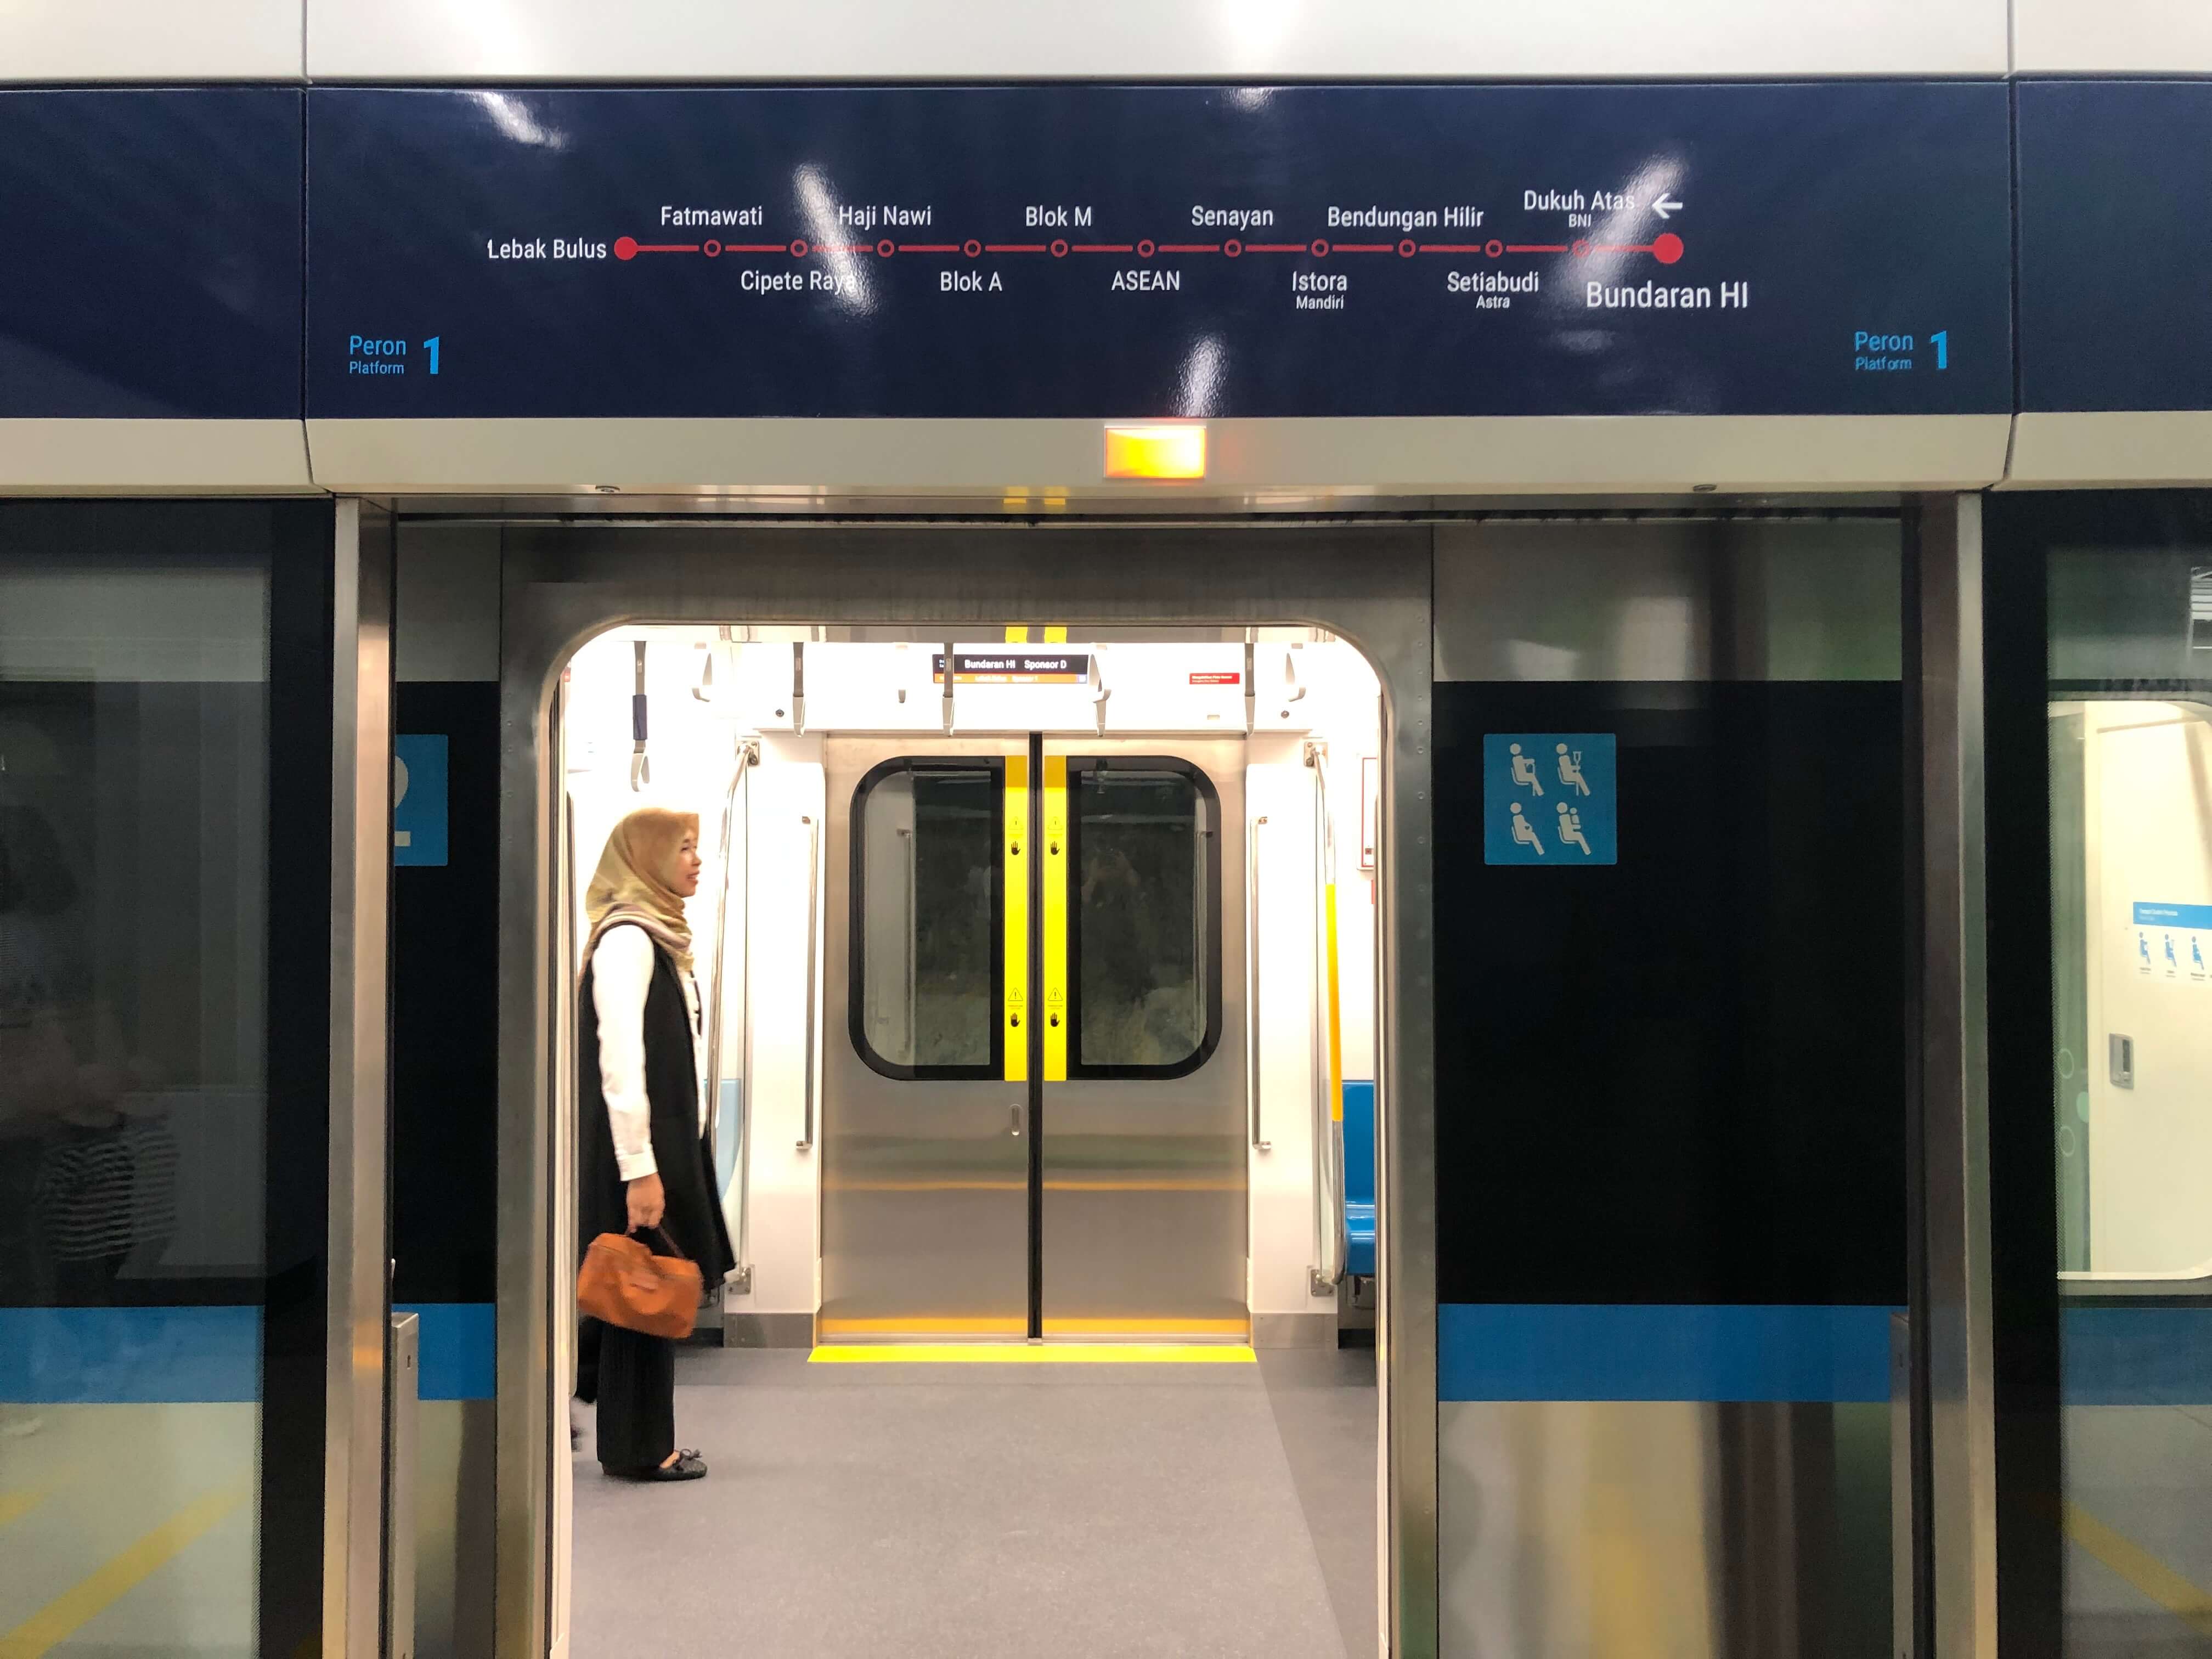 Our first impressions of Jakarta’s MRT: A fast, quiet, and smooth ride